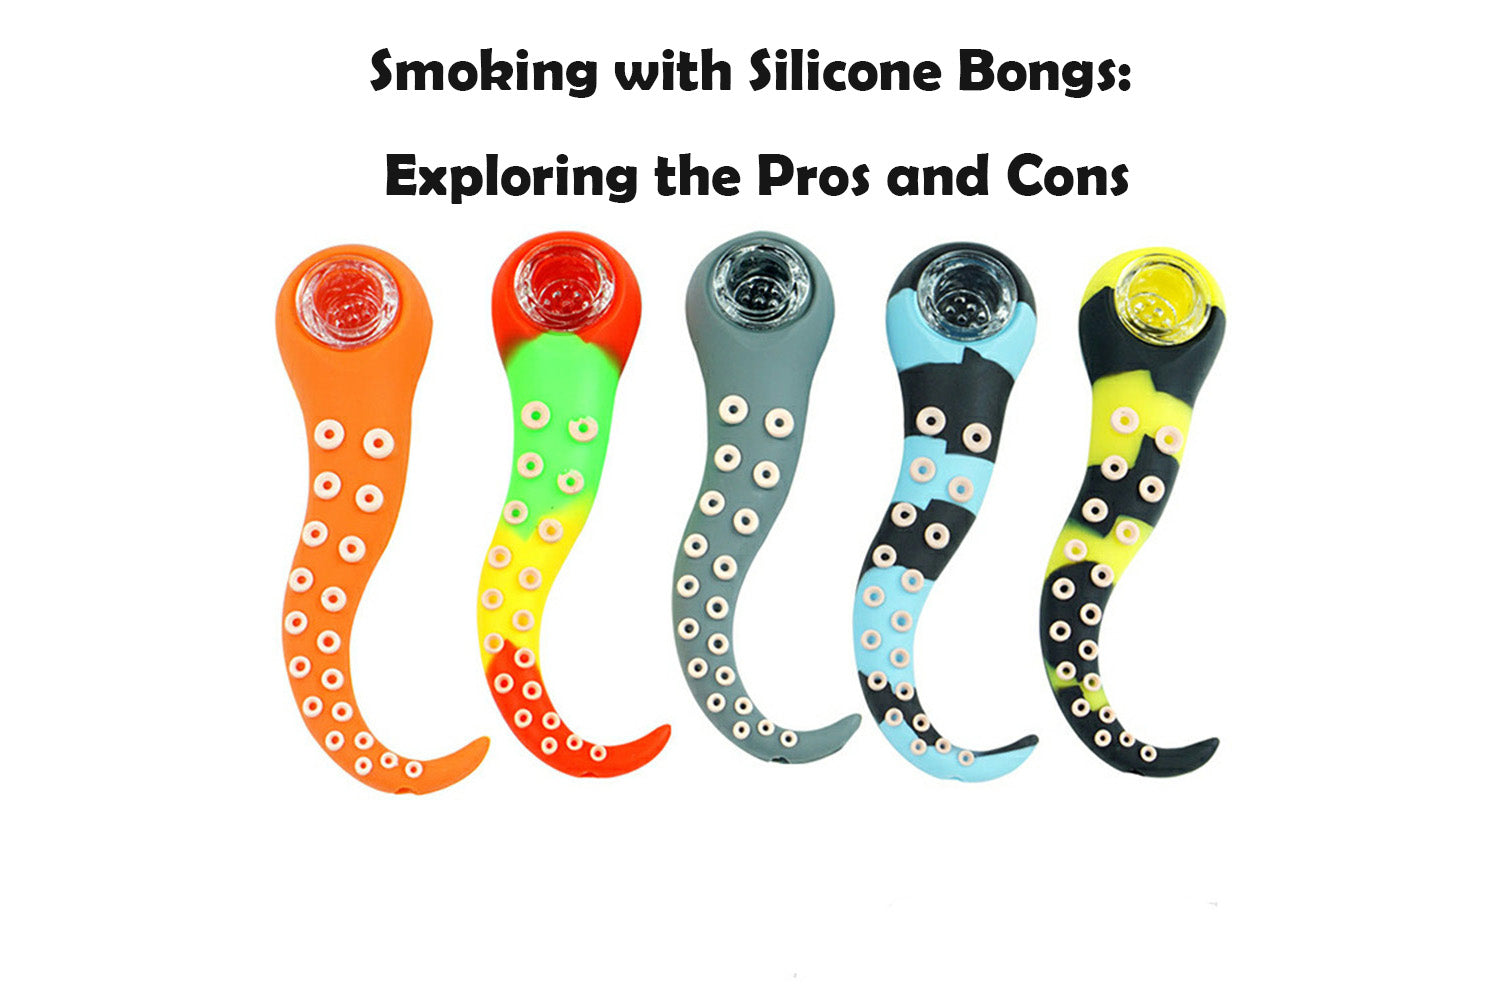 Smoking with Silicone Bongs: Exploring the Pros and Cons